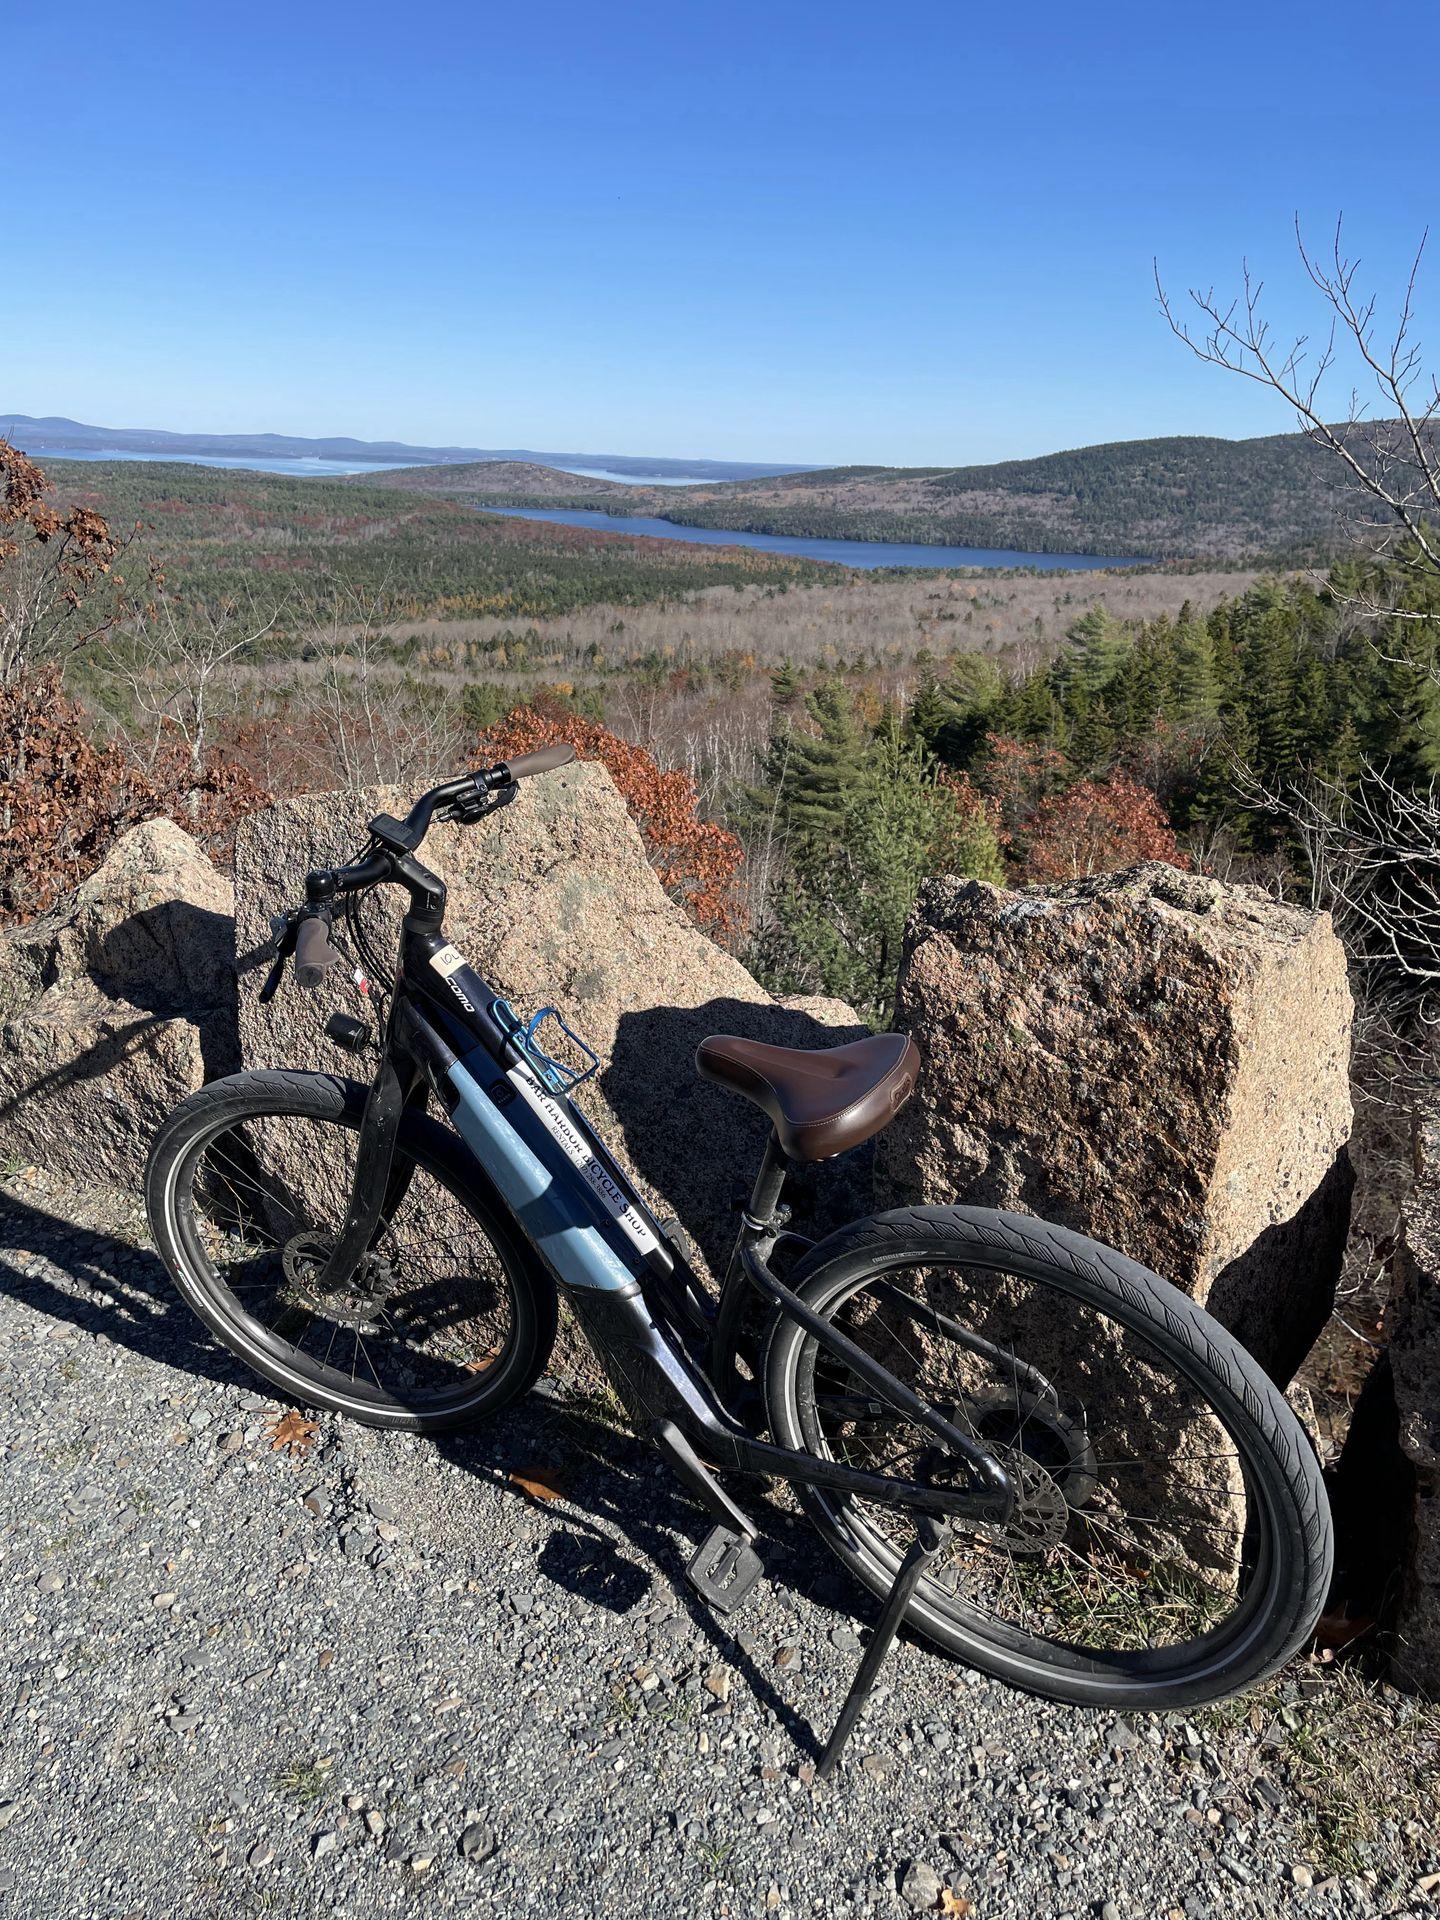 A e-bike on the Carriage Roads with a view of a lake behind it.